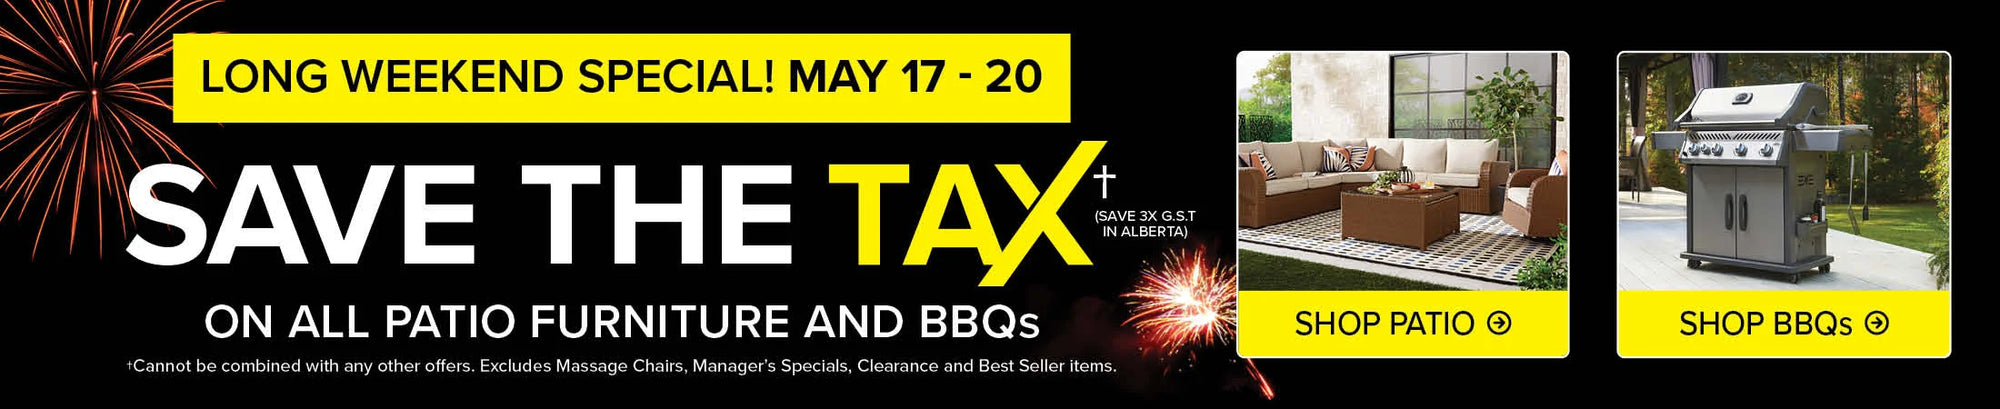 Long Weekend Special. May 17-20. Save the tax on all Patio Furniture and BBQs. Shop Patio Furniture. Shop BBQs..